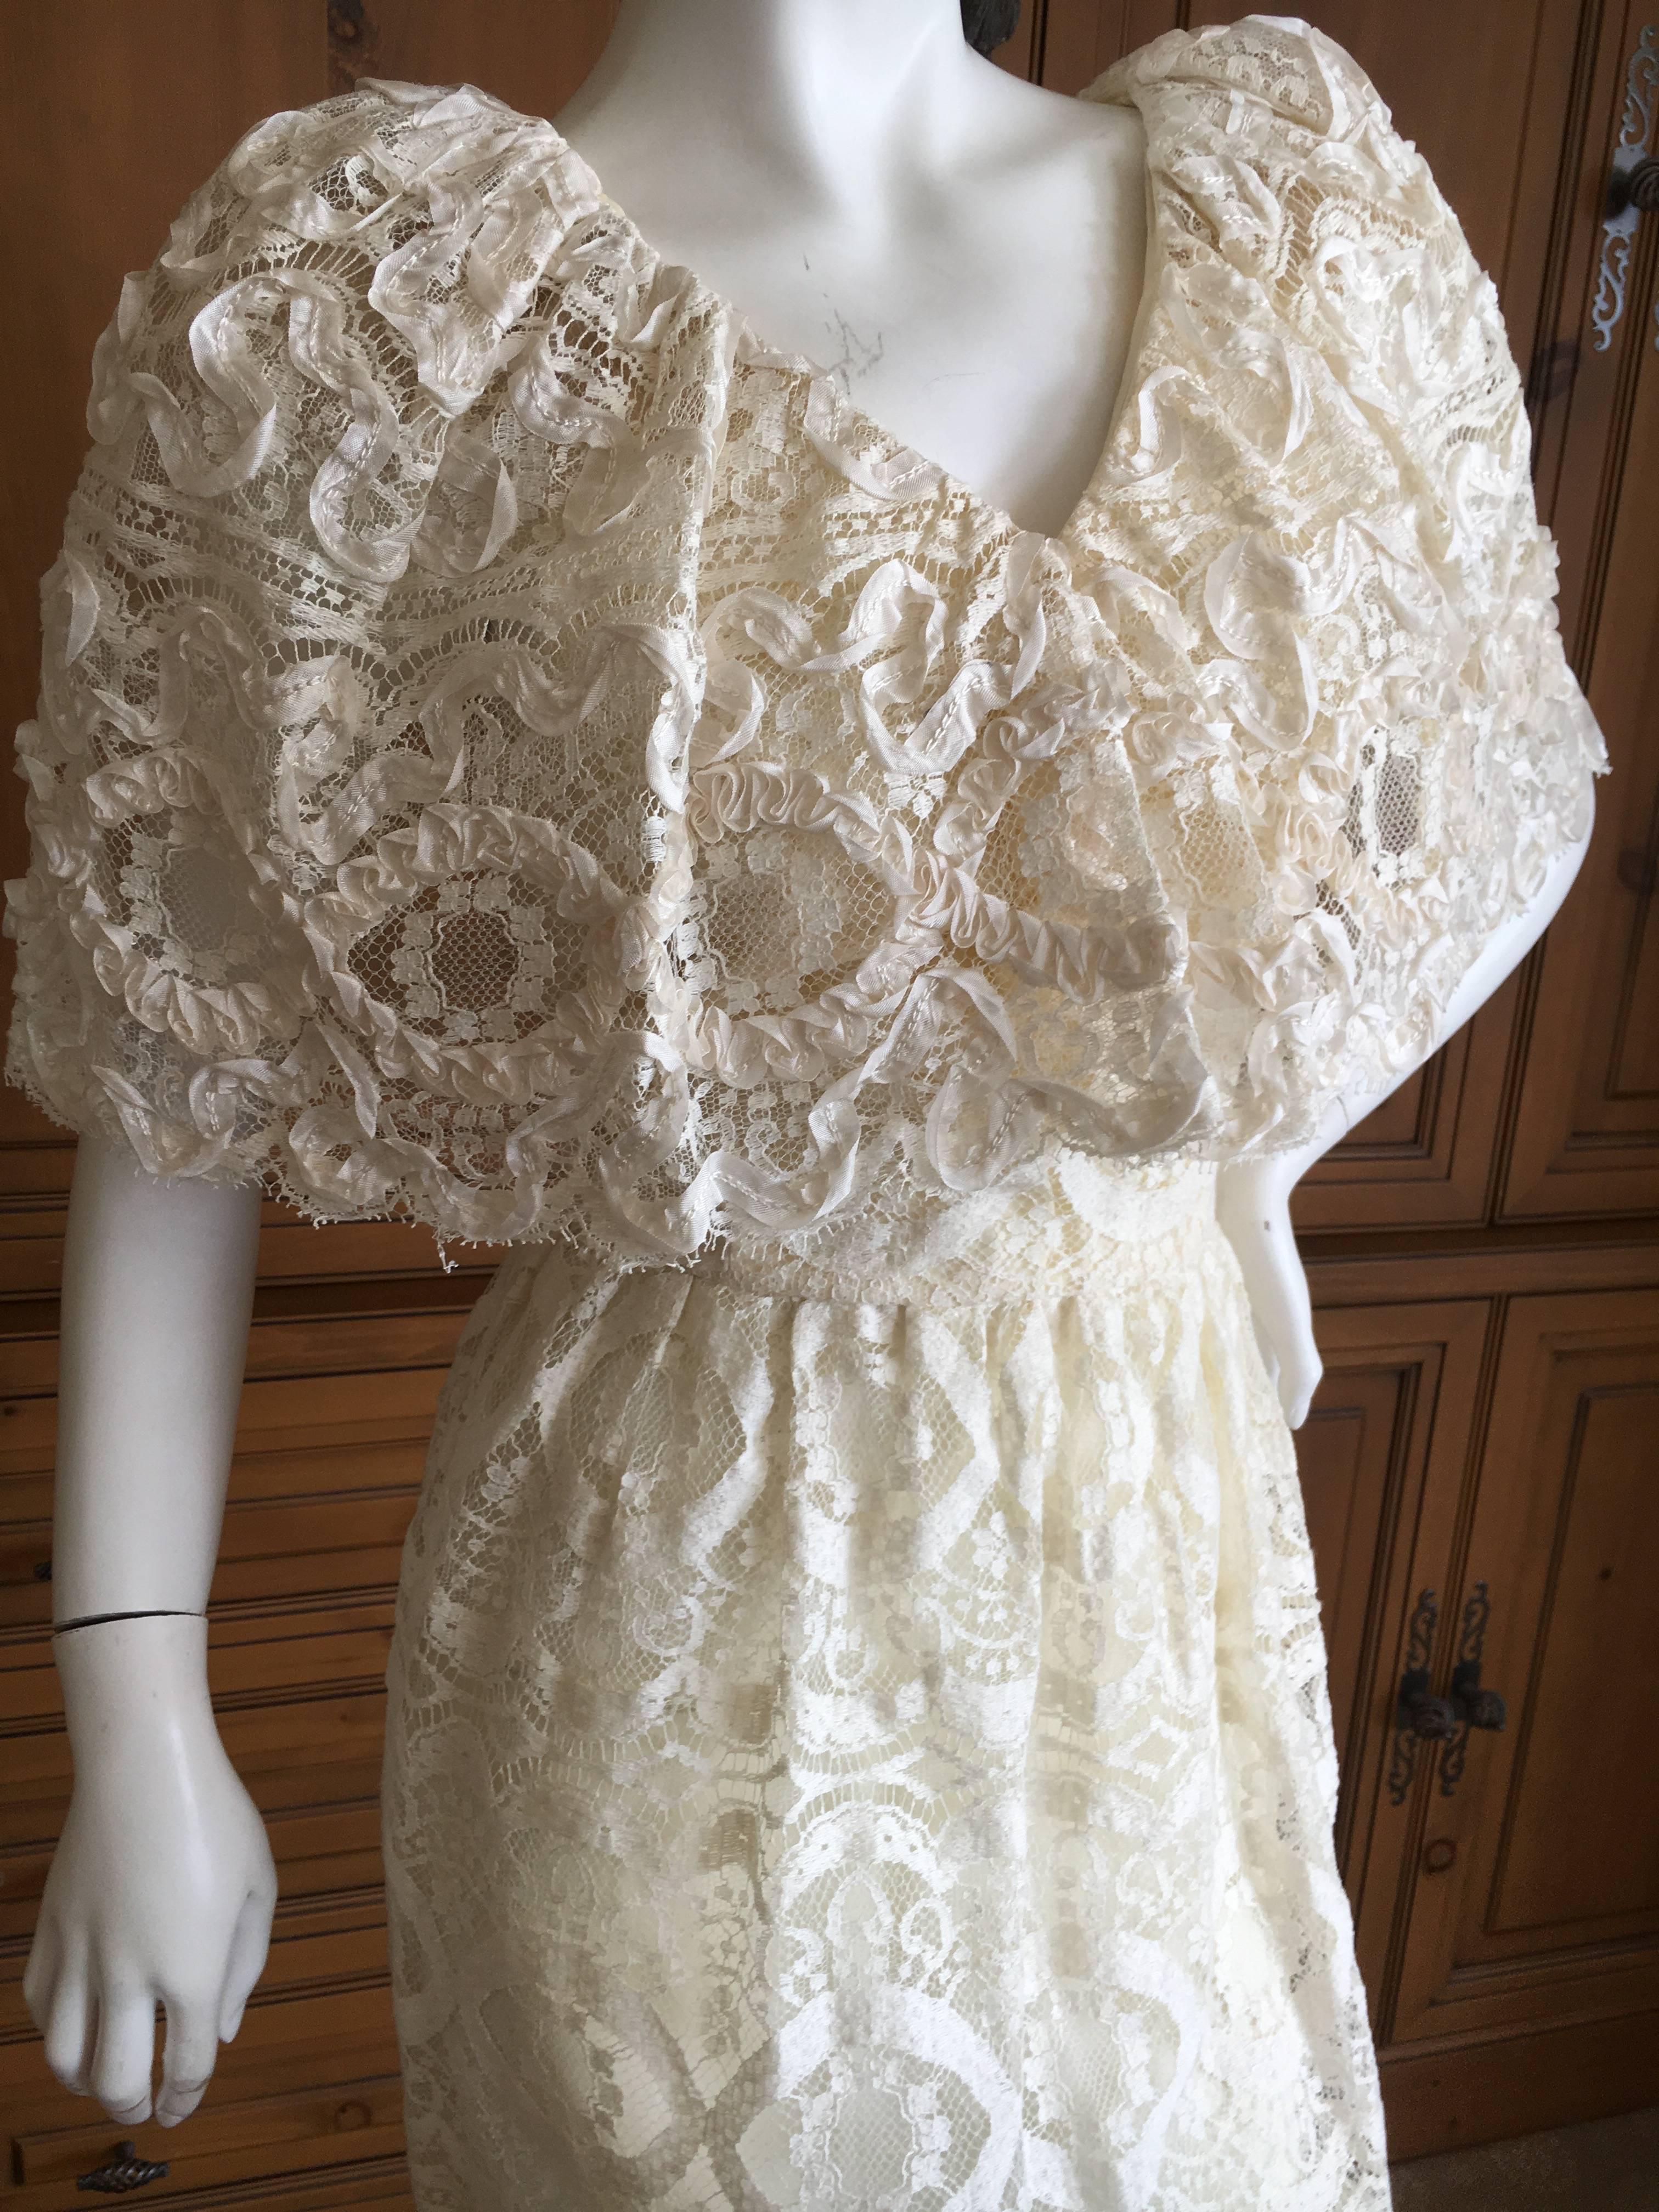 Beige Cream Lace Cape Collar Dress from Morton Myles for the Warrens For Sale